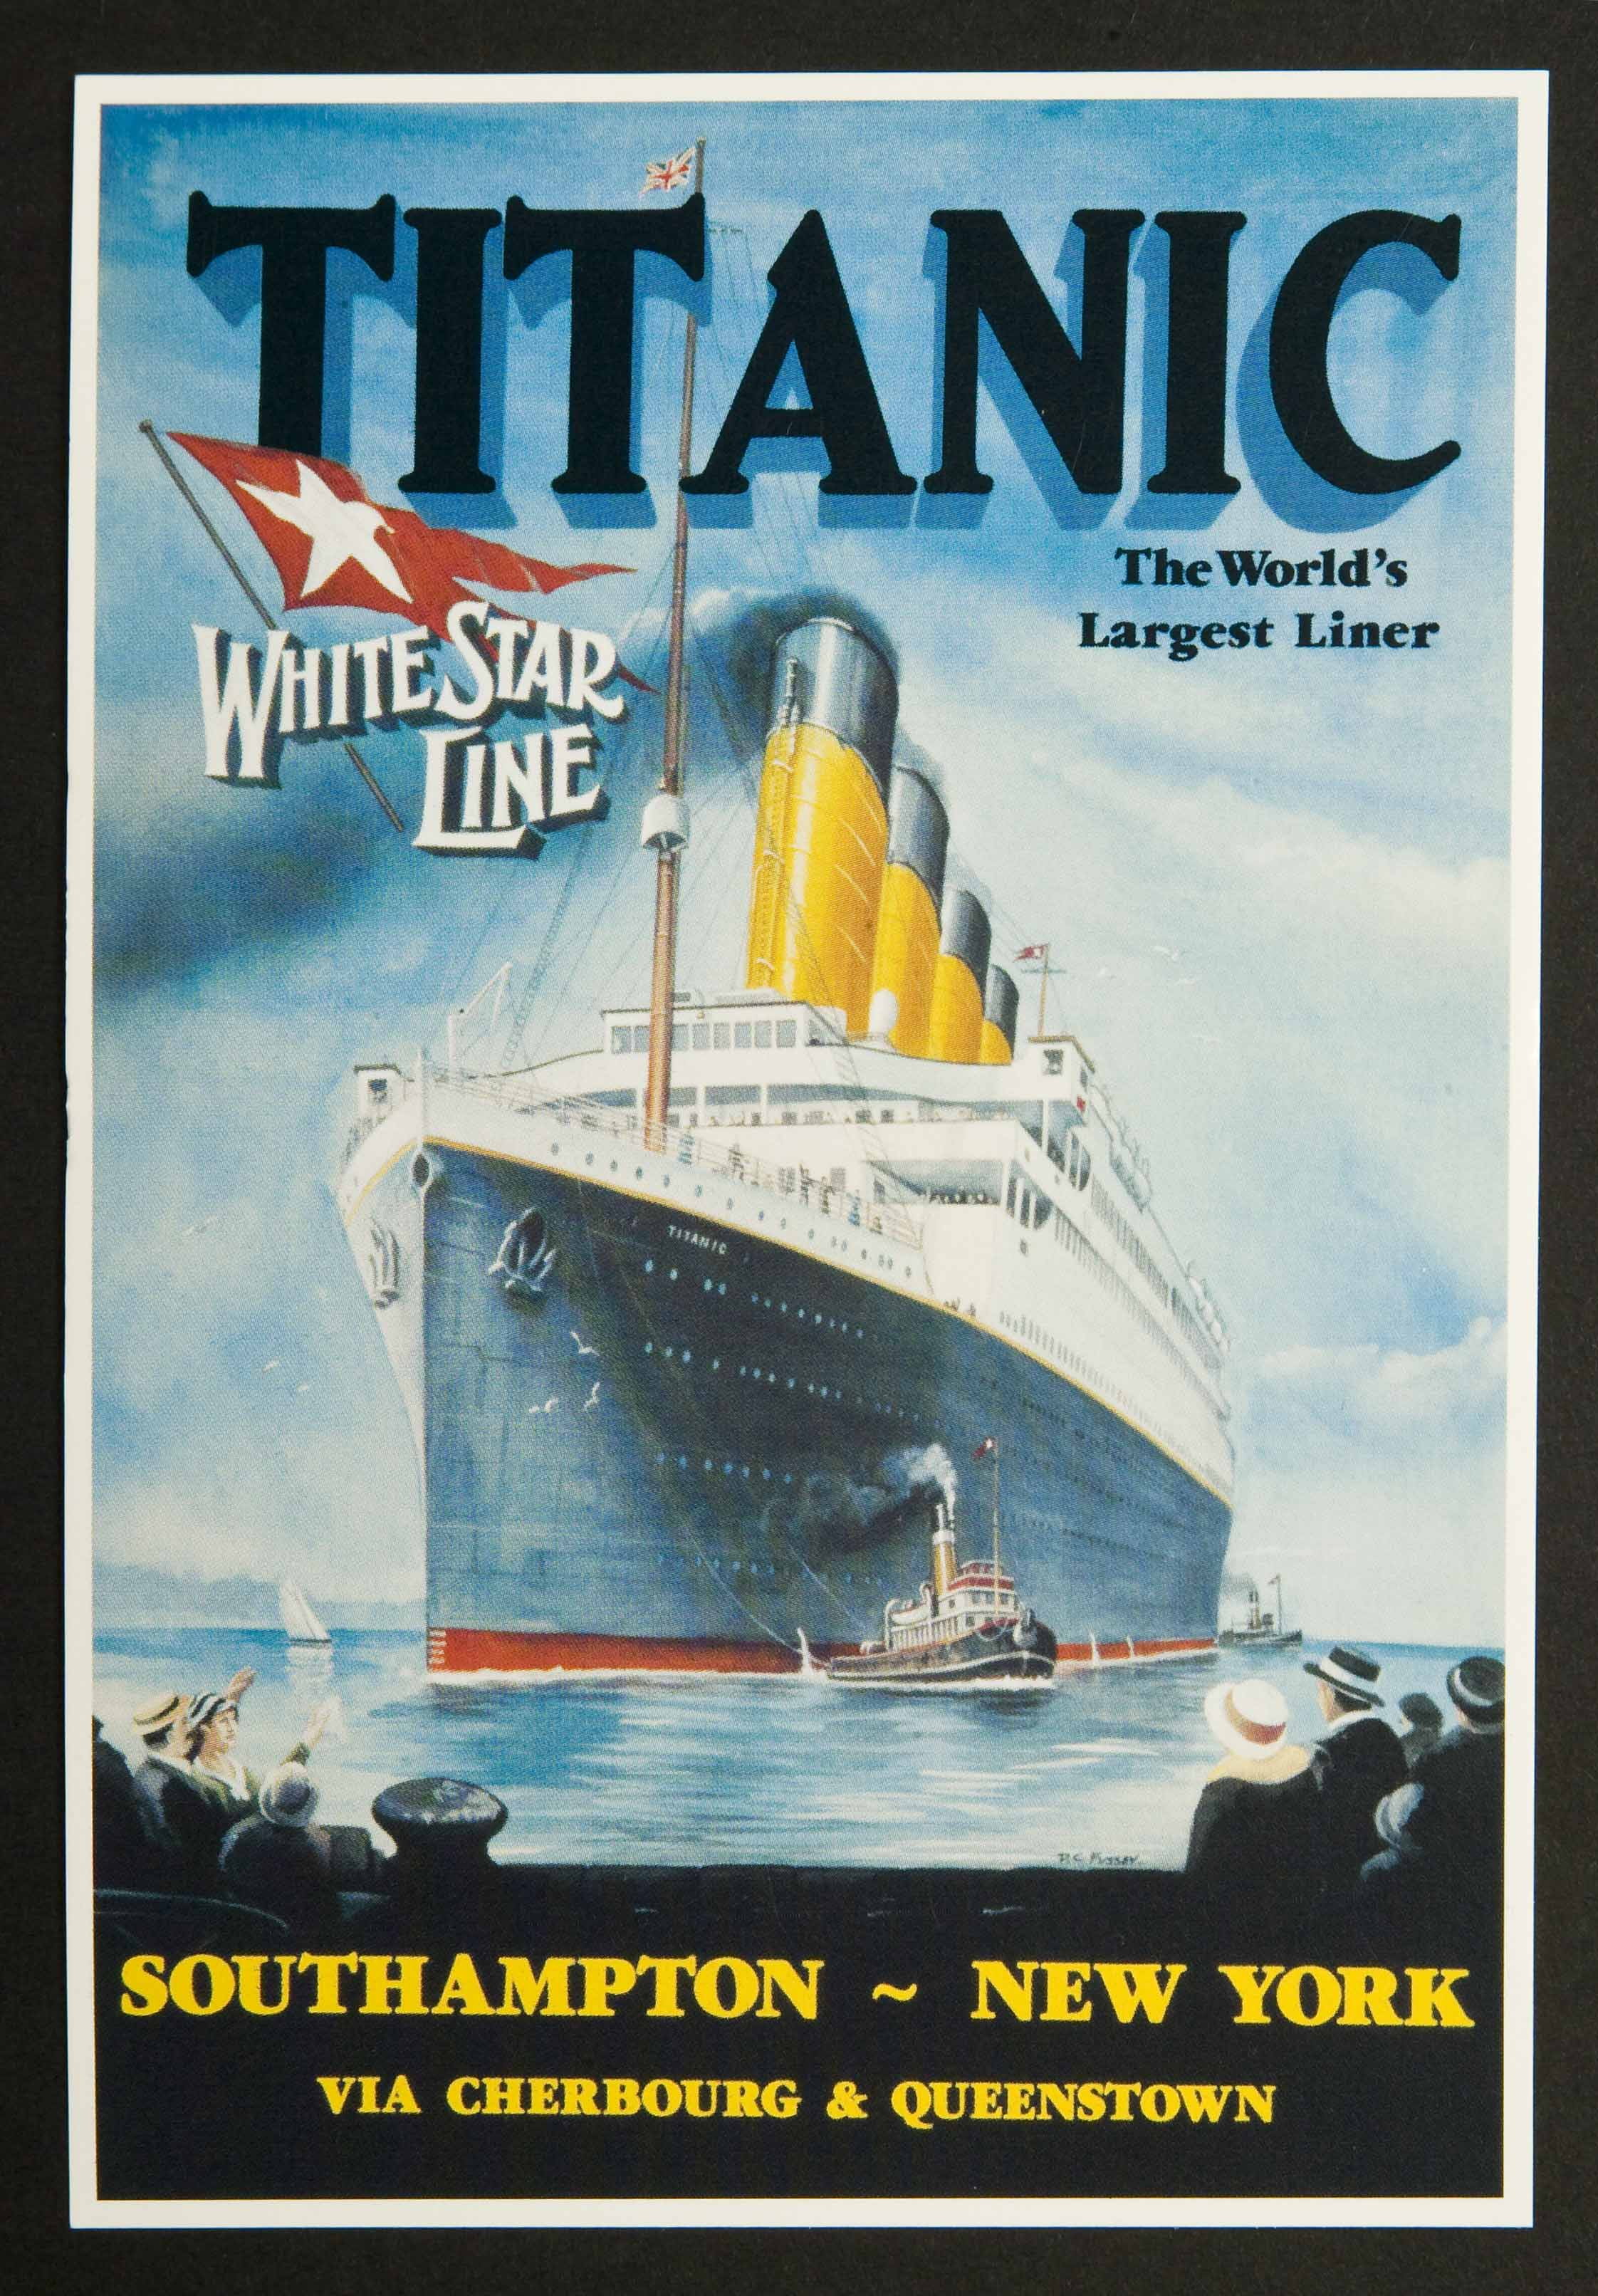 Titanic - The World's Largest Liner A1 Poster